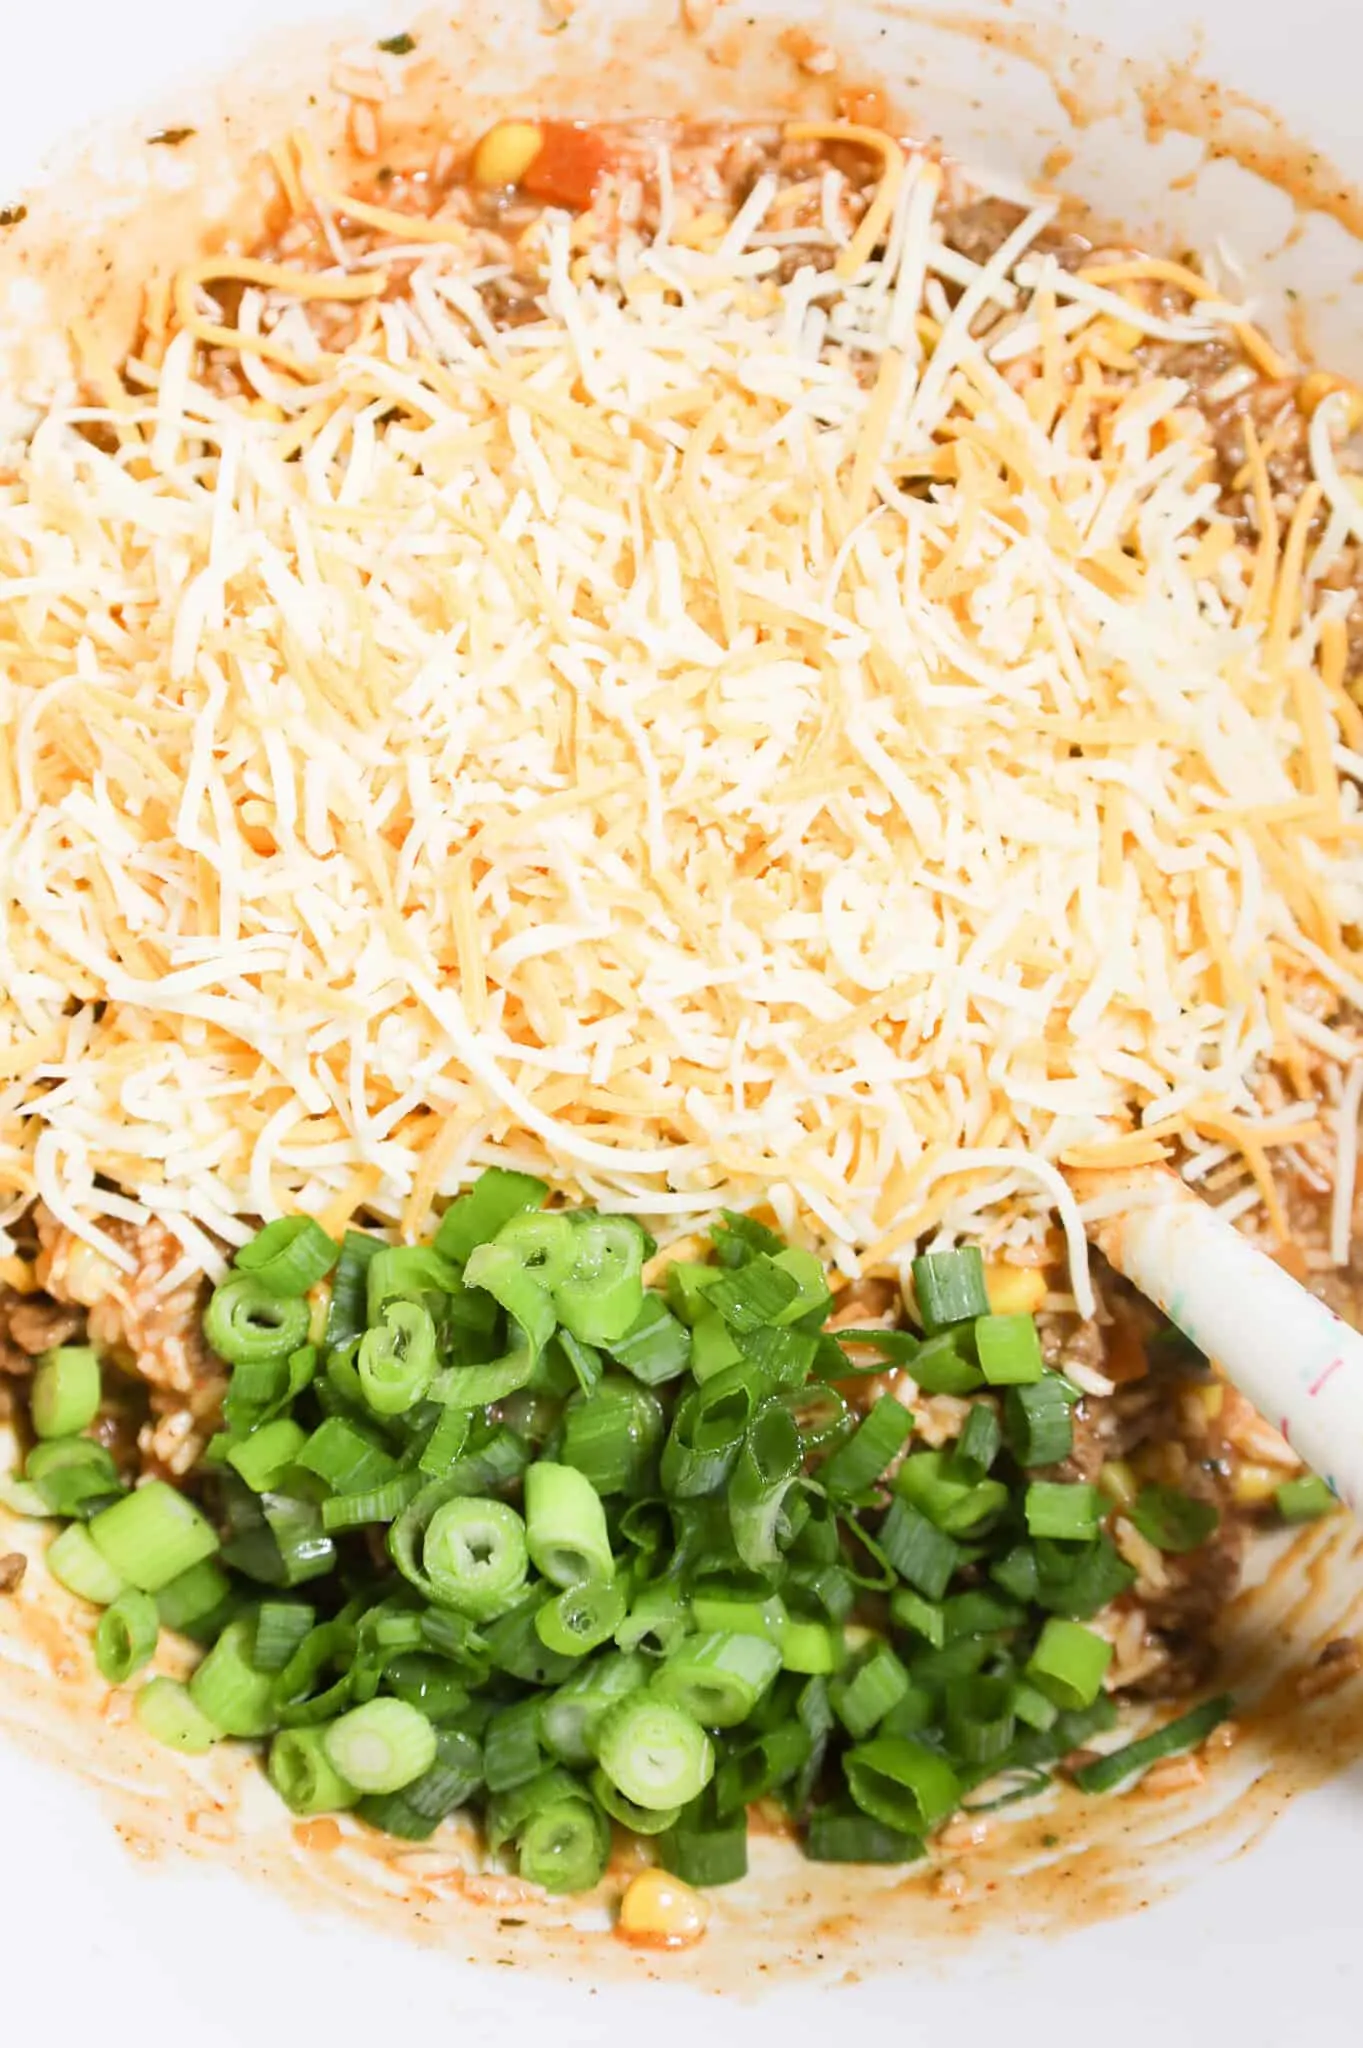 chopped green onions and shredded cheese on top of ground beef, rice and salsa mixture in a mixing bowl